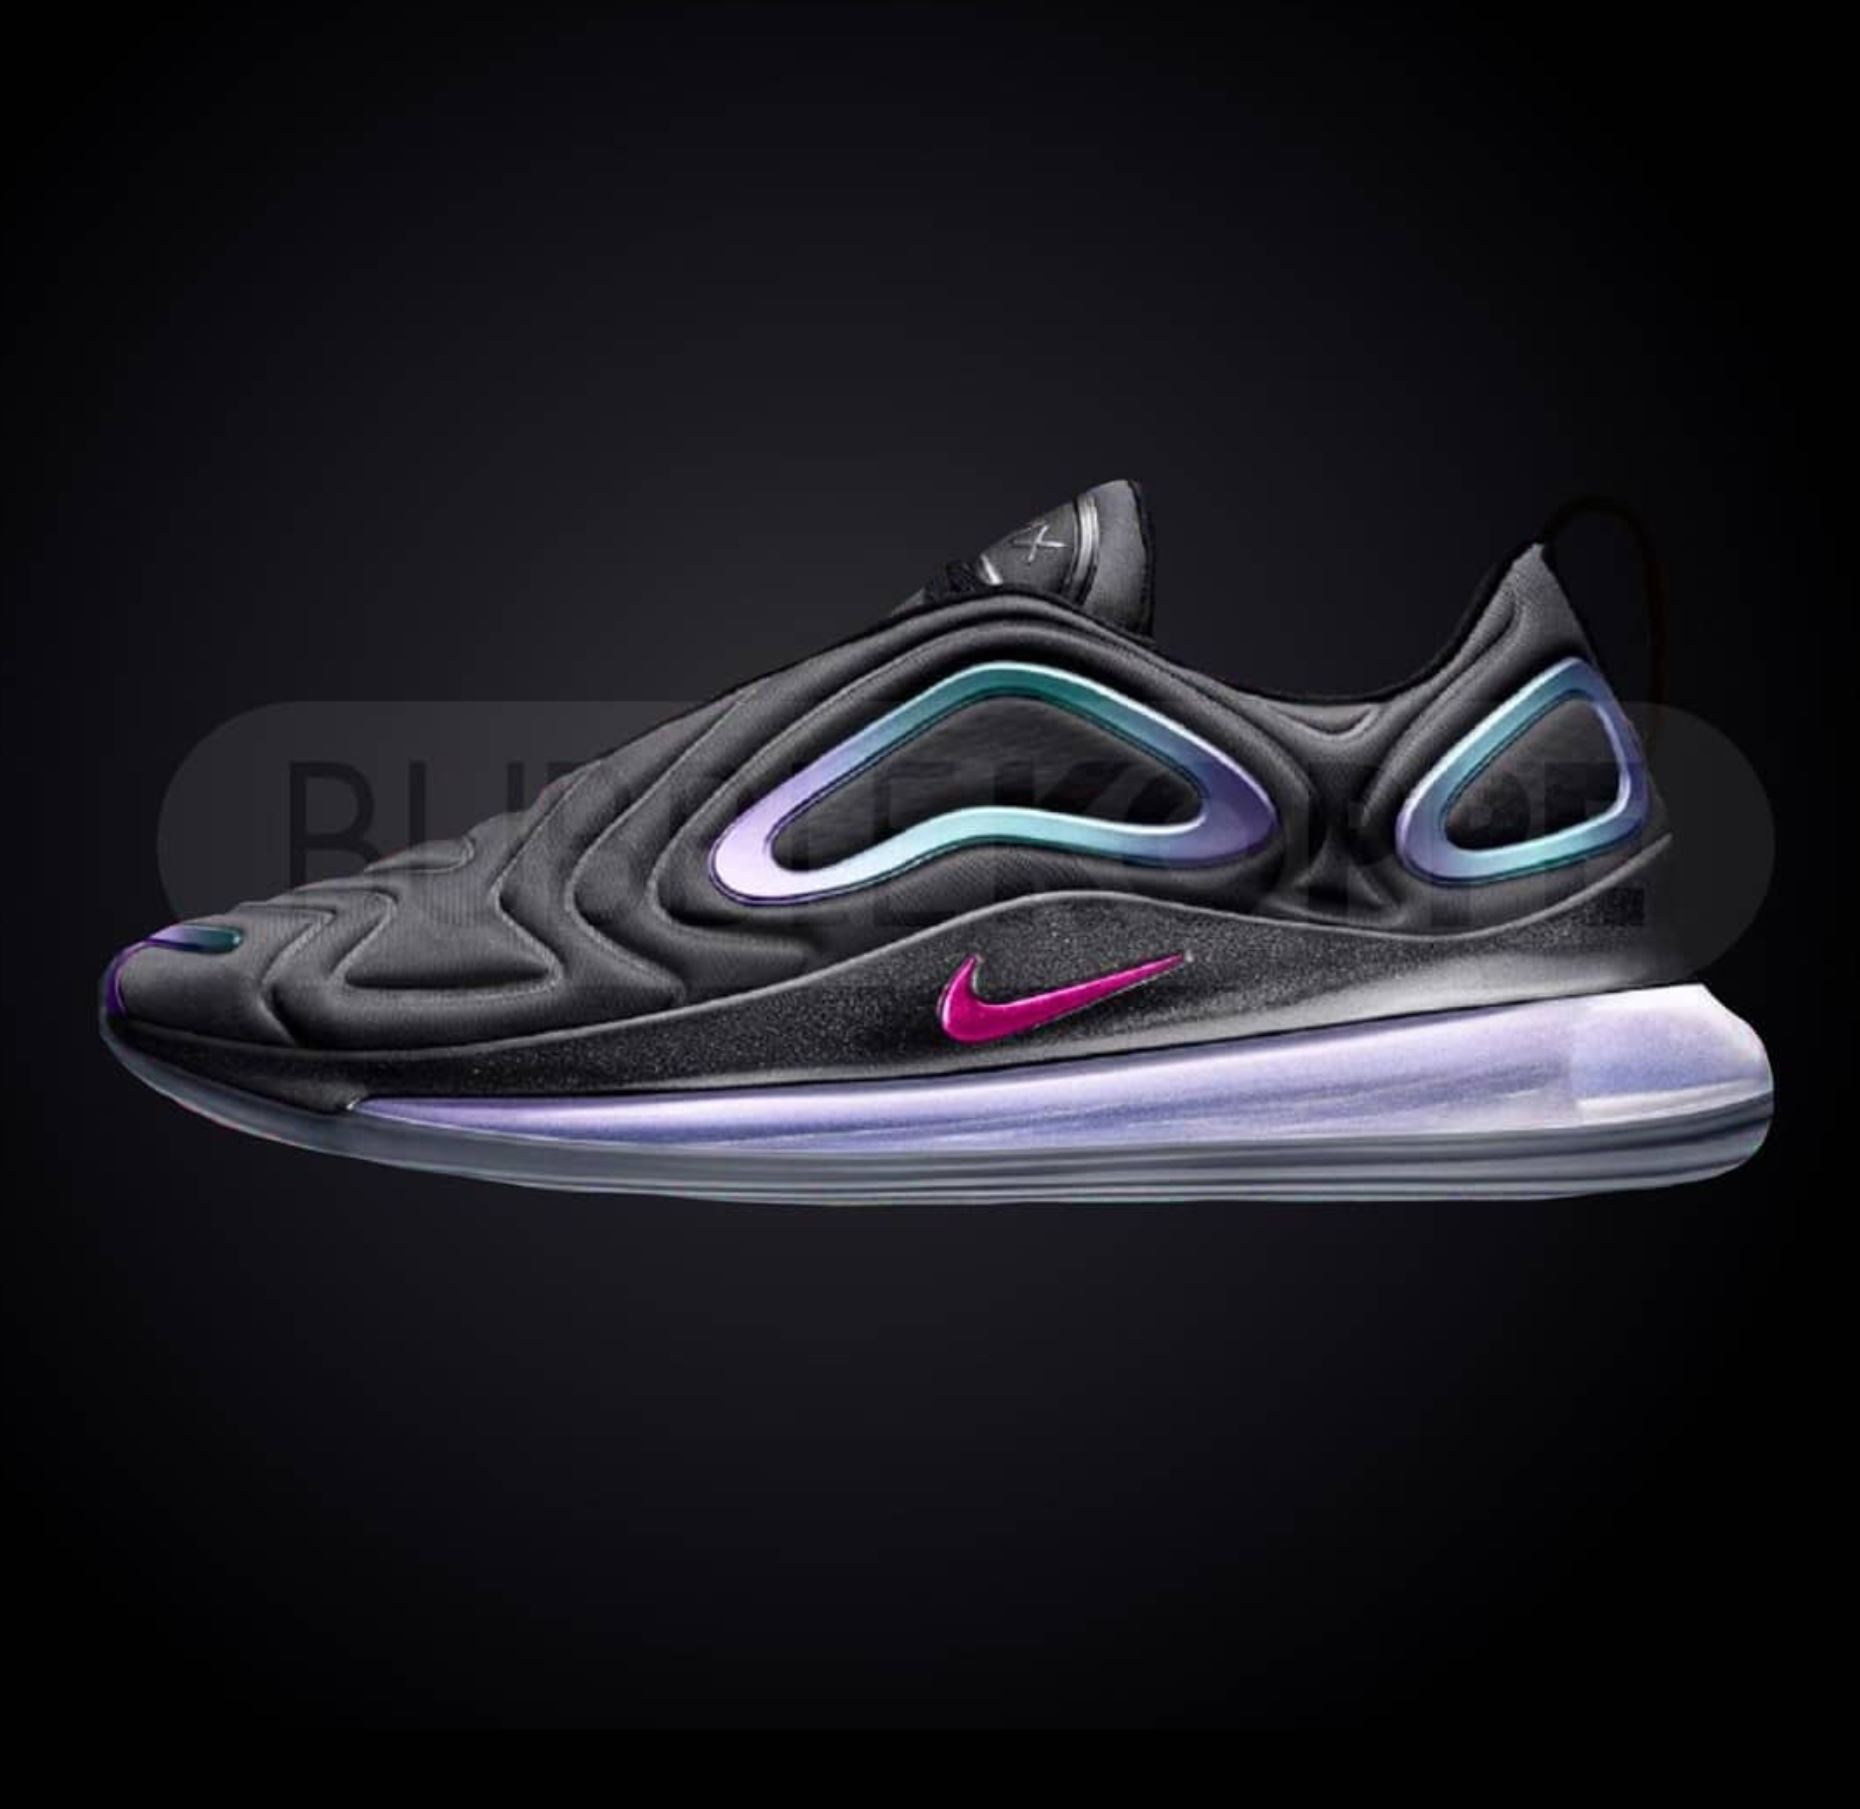 Recover Rebellion Failure The Nike Air Max 720 Introduces the First Full-Length Lifestyle Air Unit,  and the Tallest - WearTesters